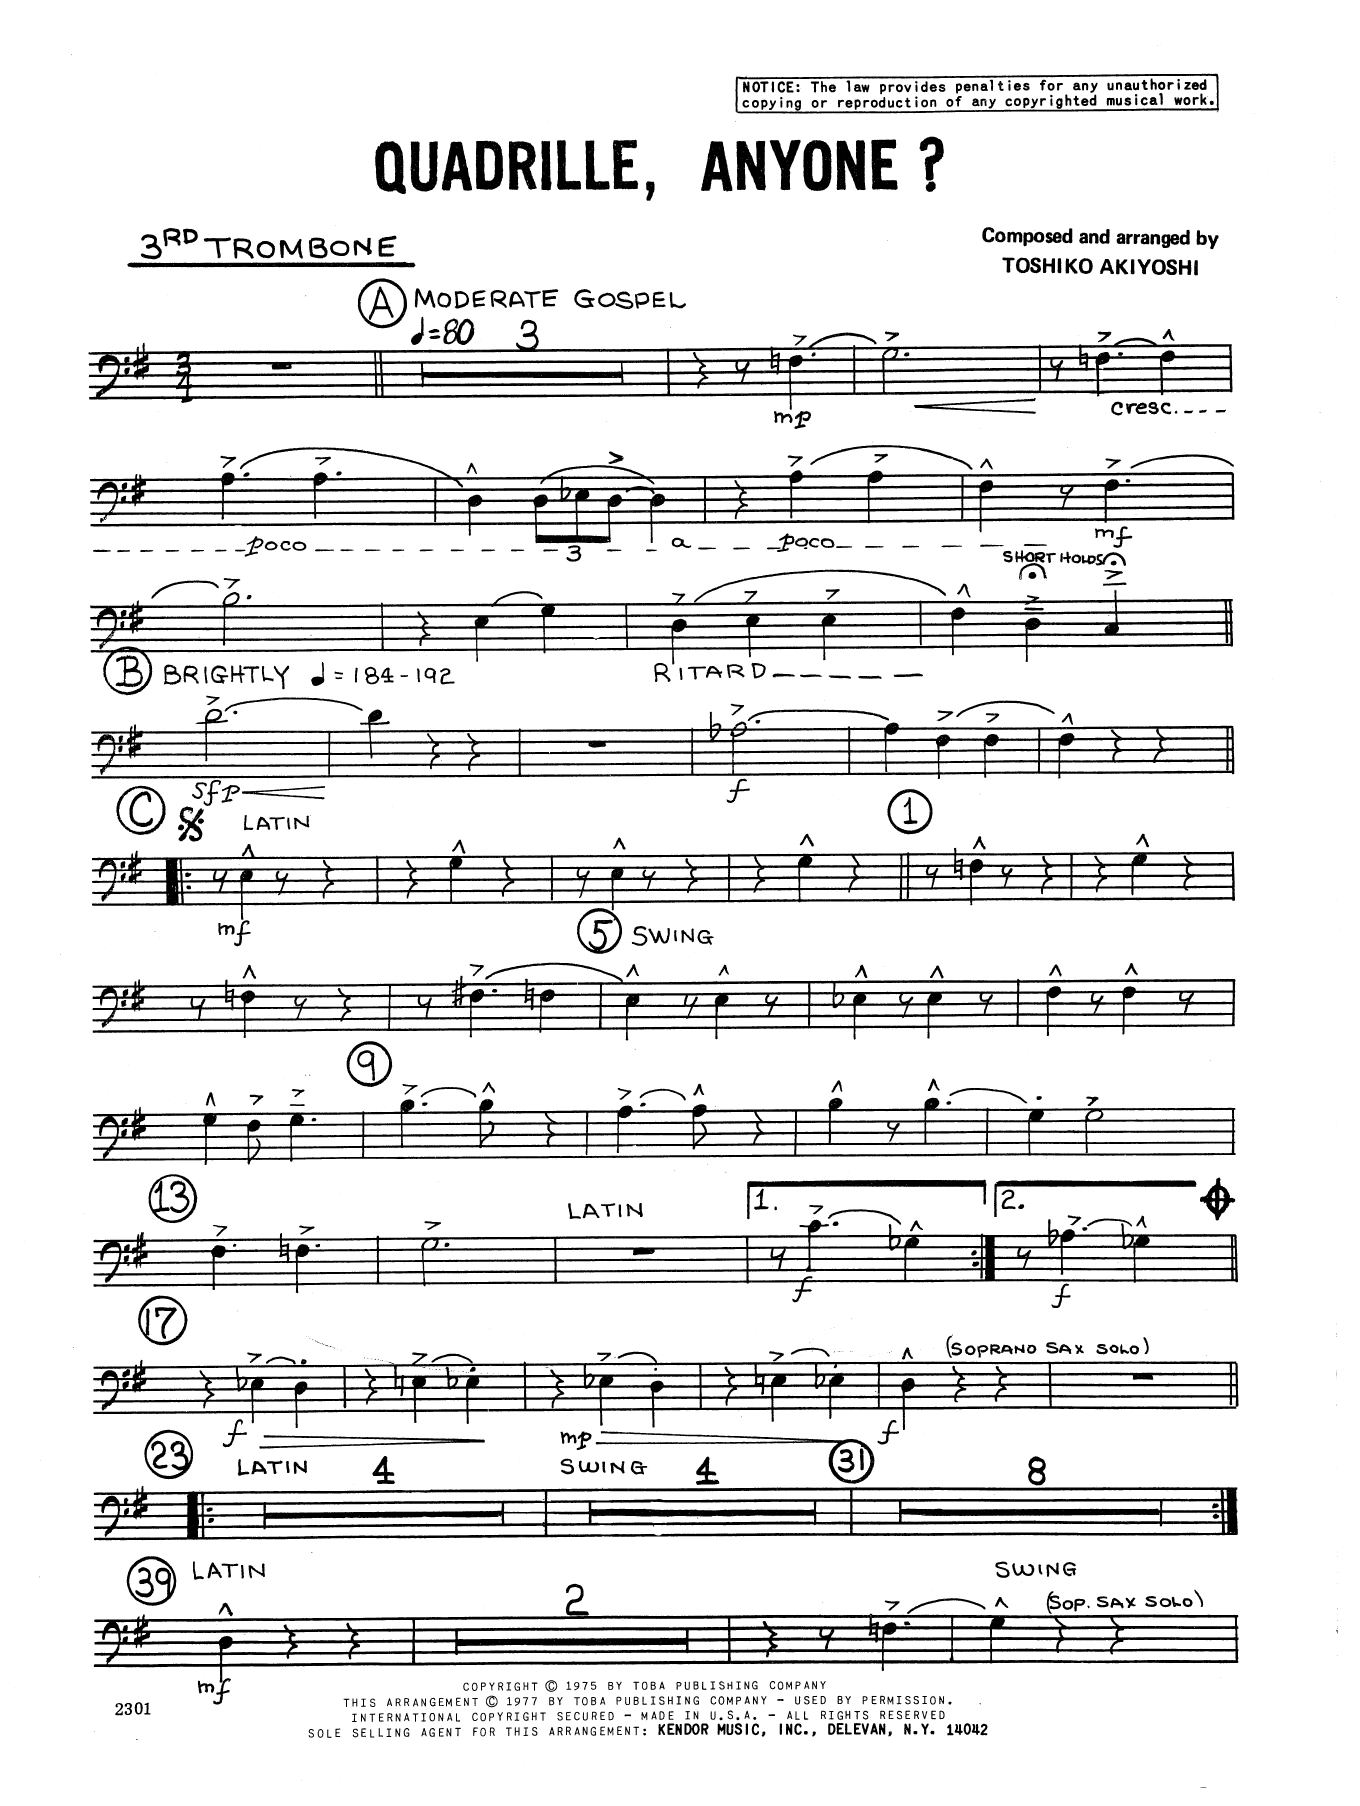 Toshiko Akiyoshi Quadrille, Anyone? - 3rd Trombone sheet music preview music notes and score for Jazz Ensemble including 2 page(s)